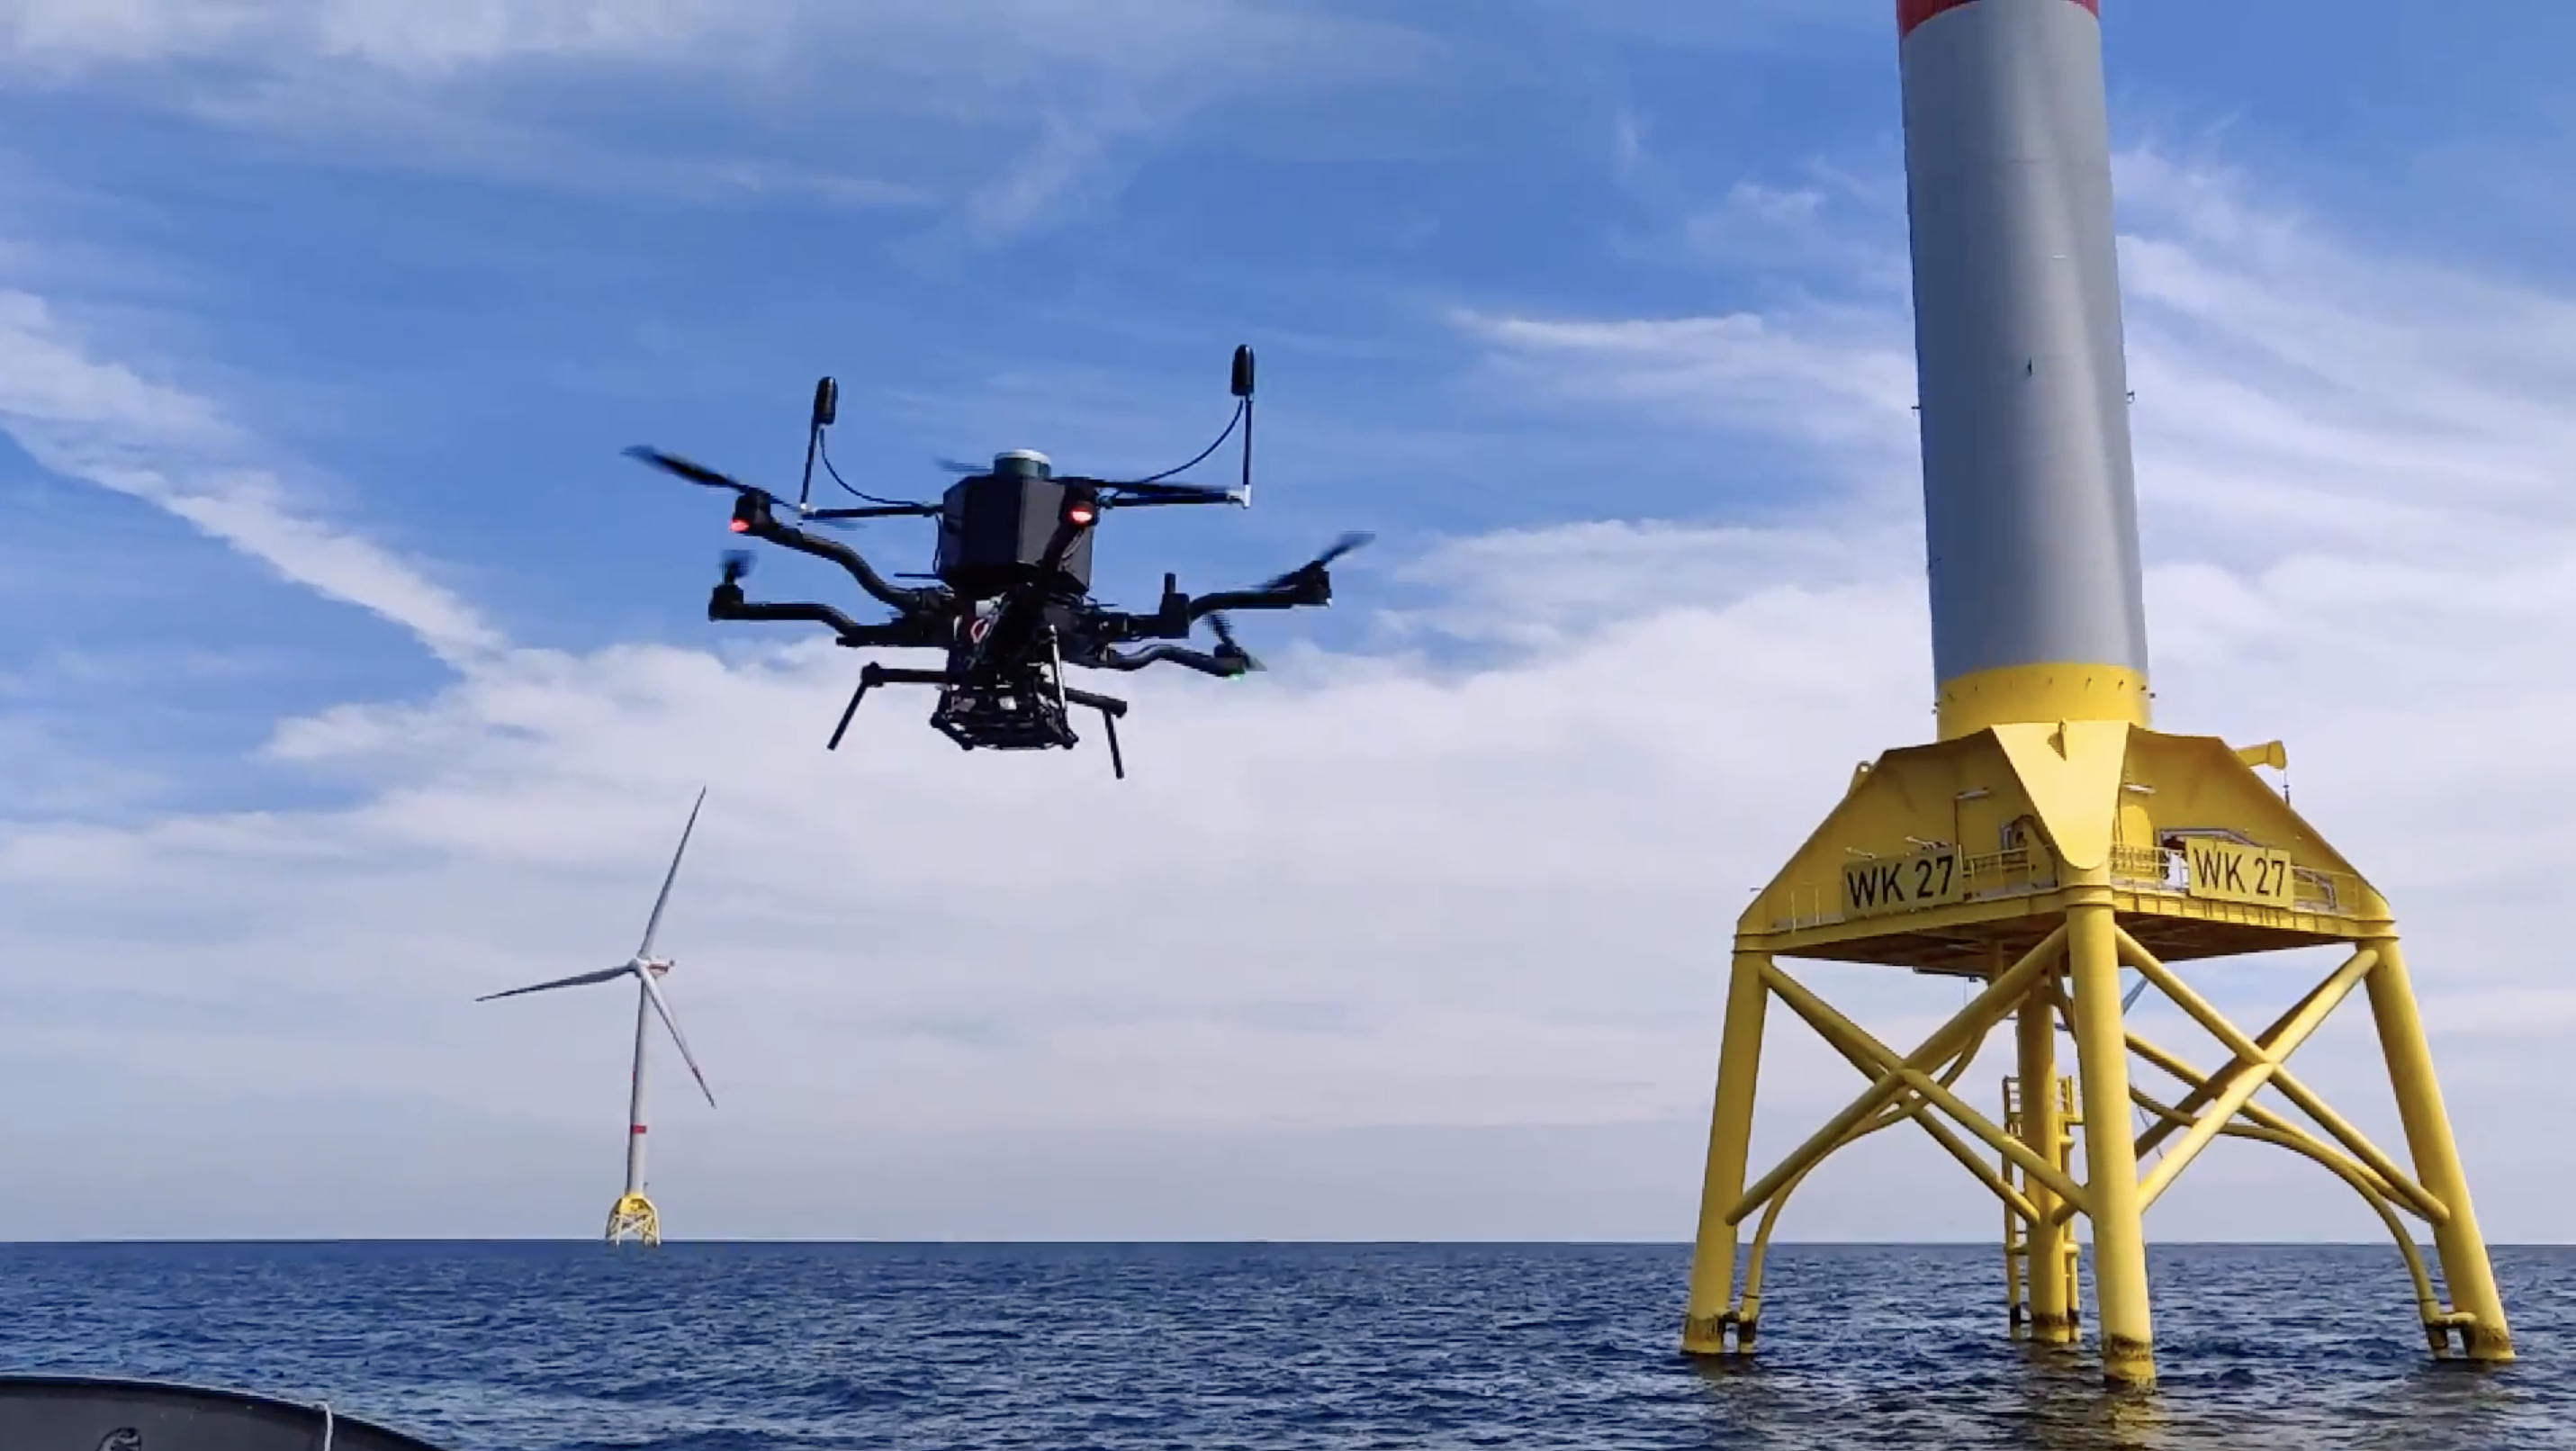 A blade inspection drone near one of the turbines